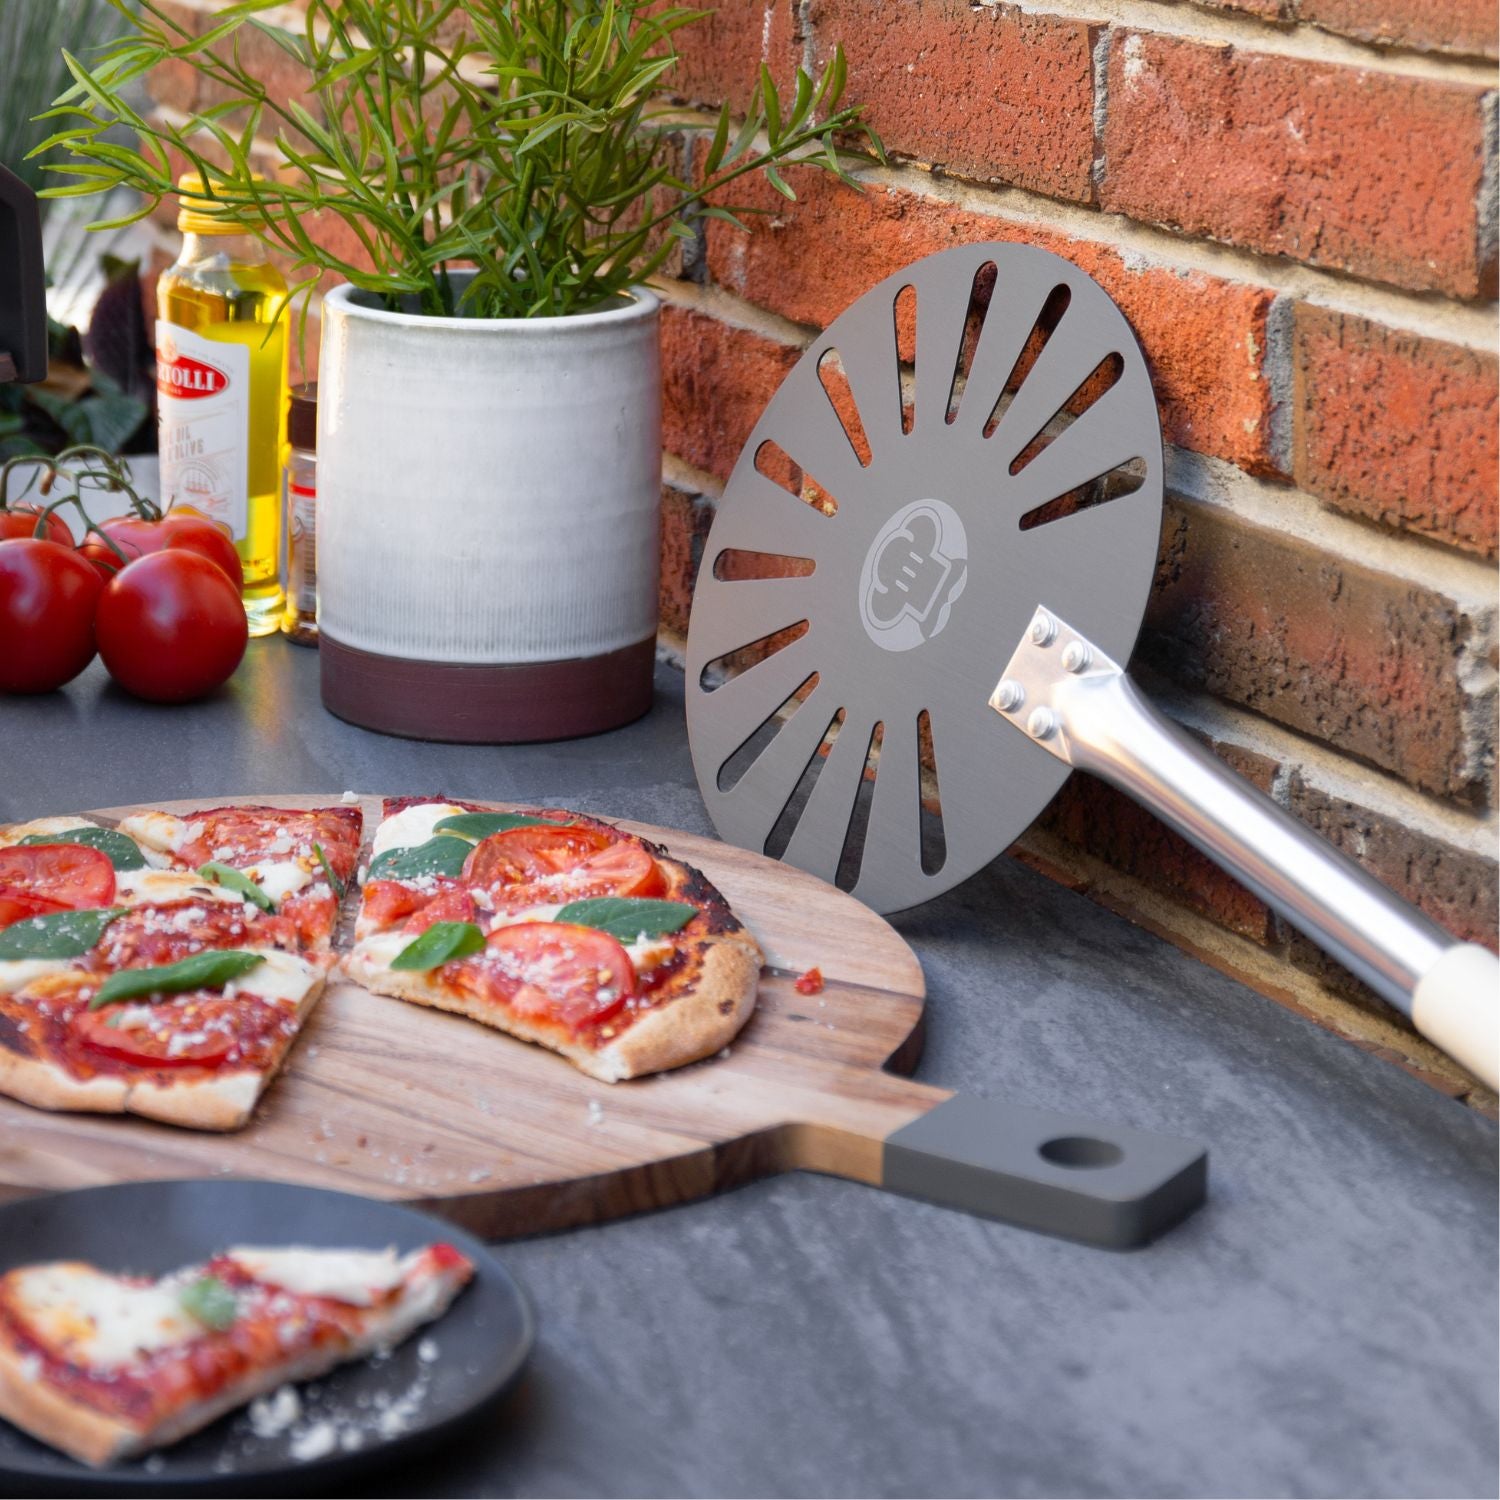  Chef Pomodoro Cast Iron Pizza Pan, Pre-Seasoned Skillet with  Handles, Baking Pan, Round Griddle for Dosa Tawa Roti, Comal for Tortillas,  Baking Stove, Oven, Grill BBQ and Campfire (12-inch): Home 